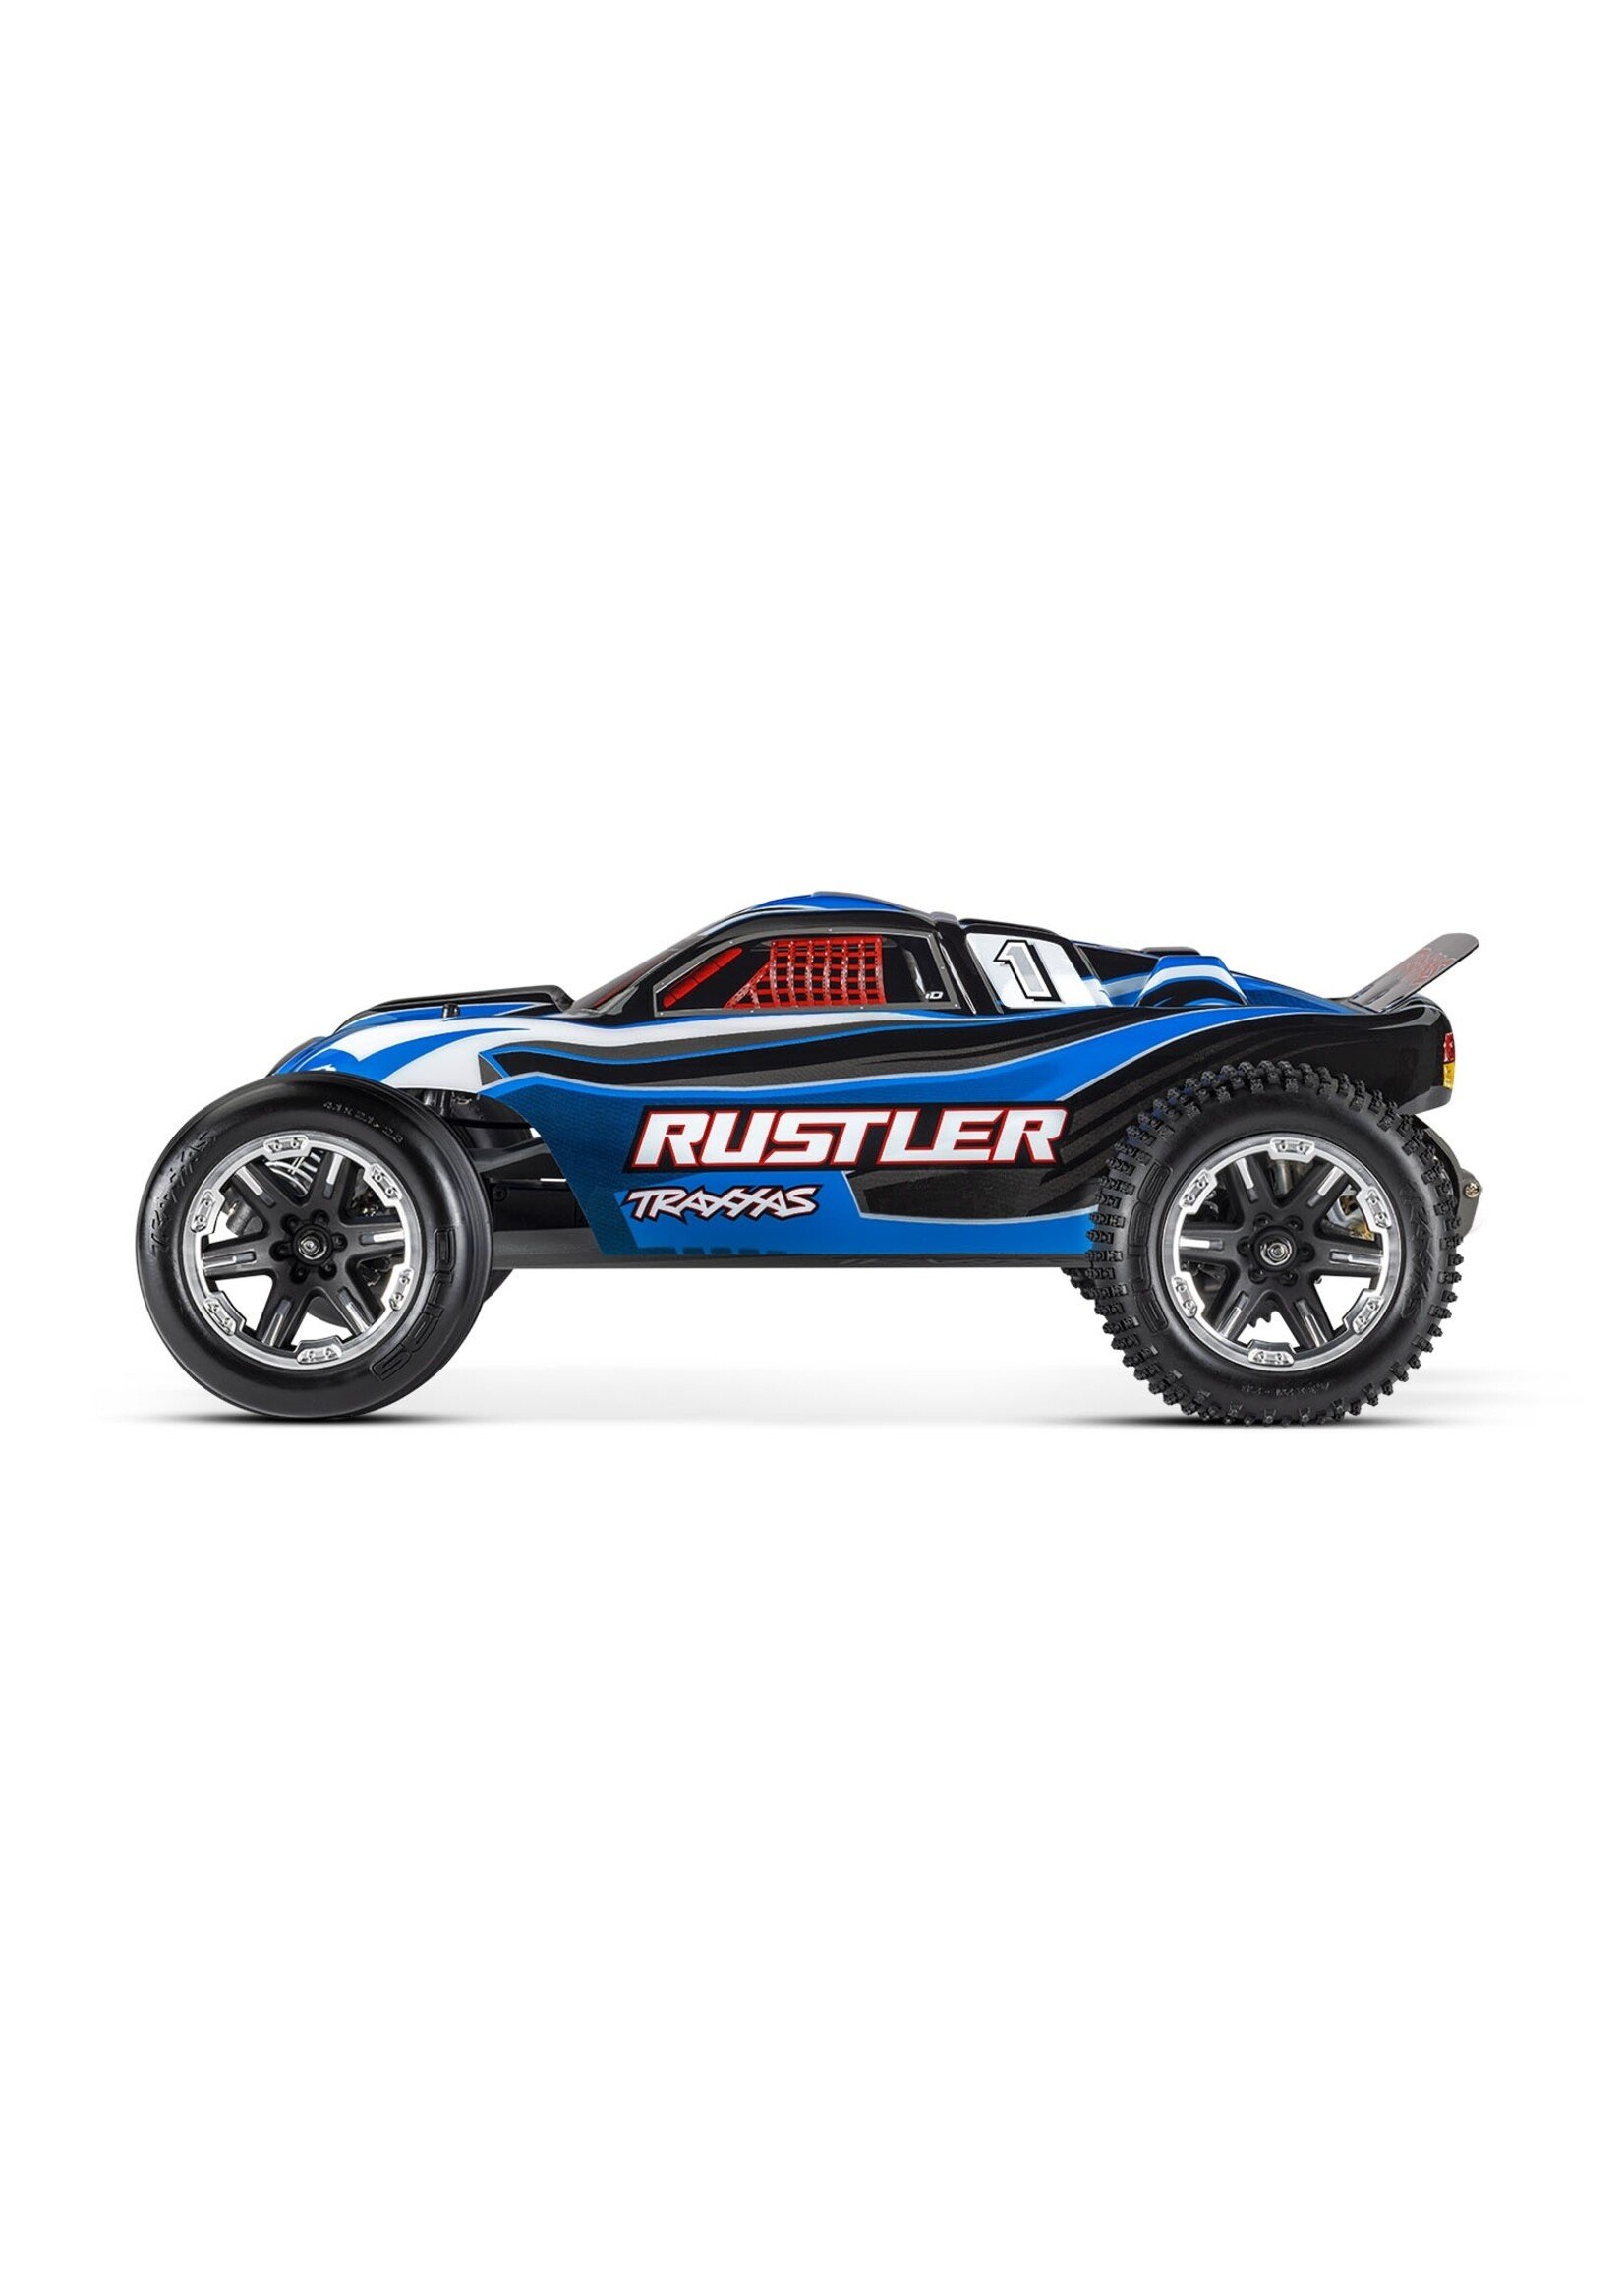 Traxxas 1/10 Rustler Stadium Truck With USB-C Charger - Blue